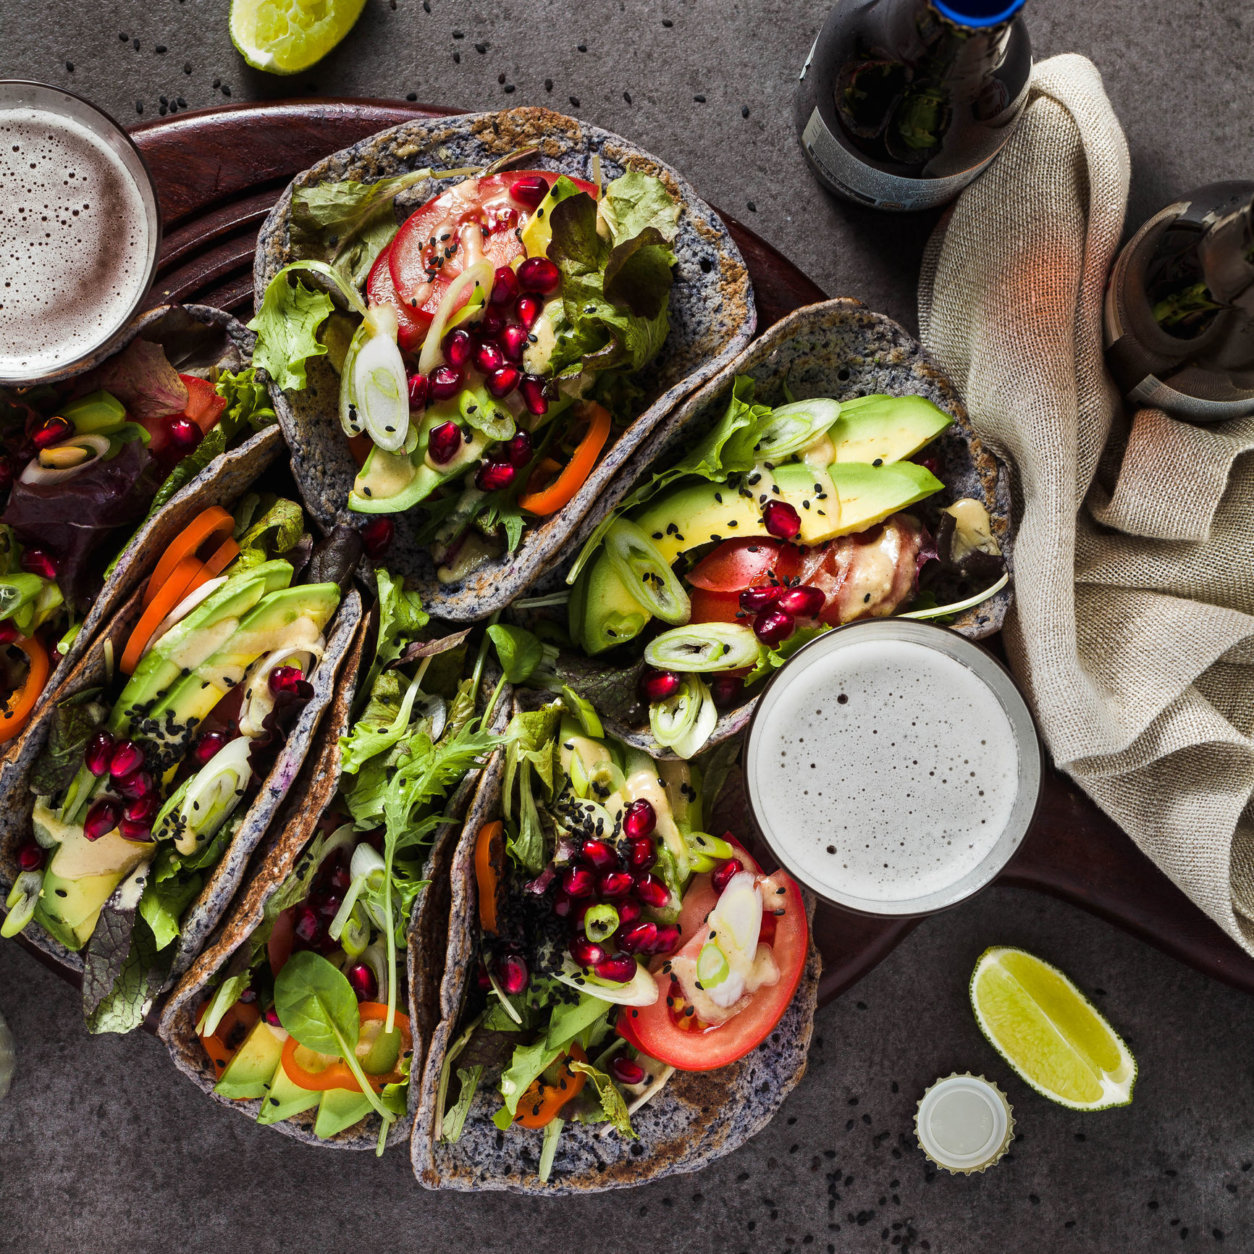 Gluten-free vegan tacos from black bean  with tomato and avocado salad  with tahini sauce and pomegranate seeds. healthy fast food for the whole family or party on a dark background with beer